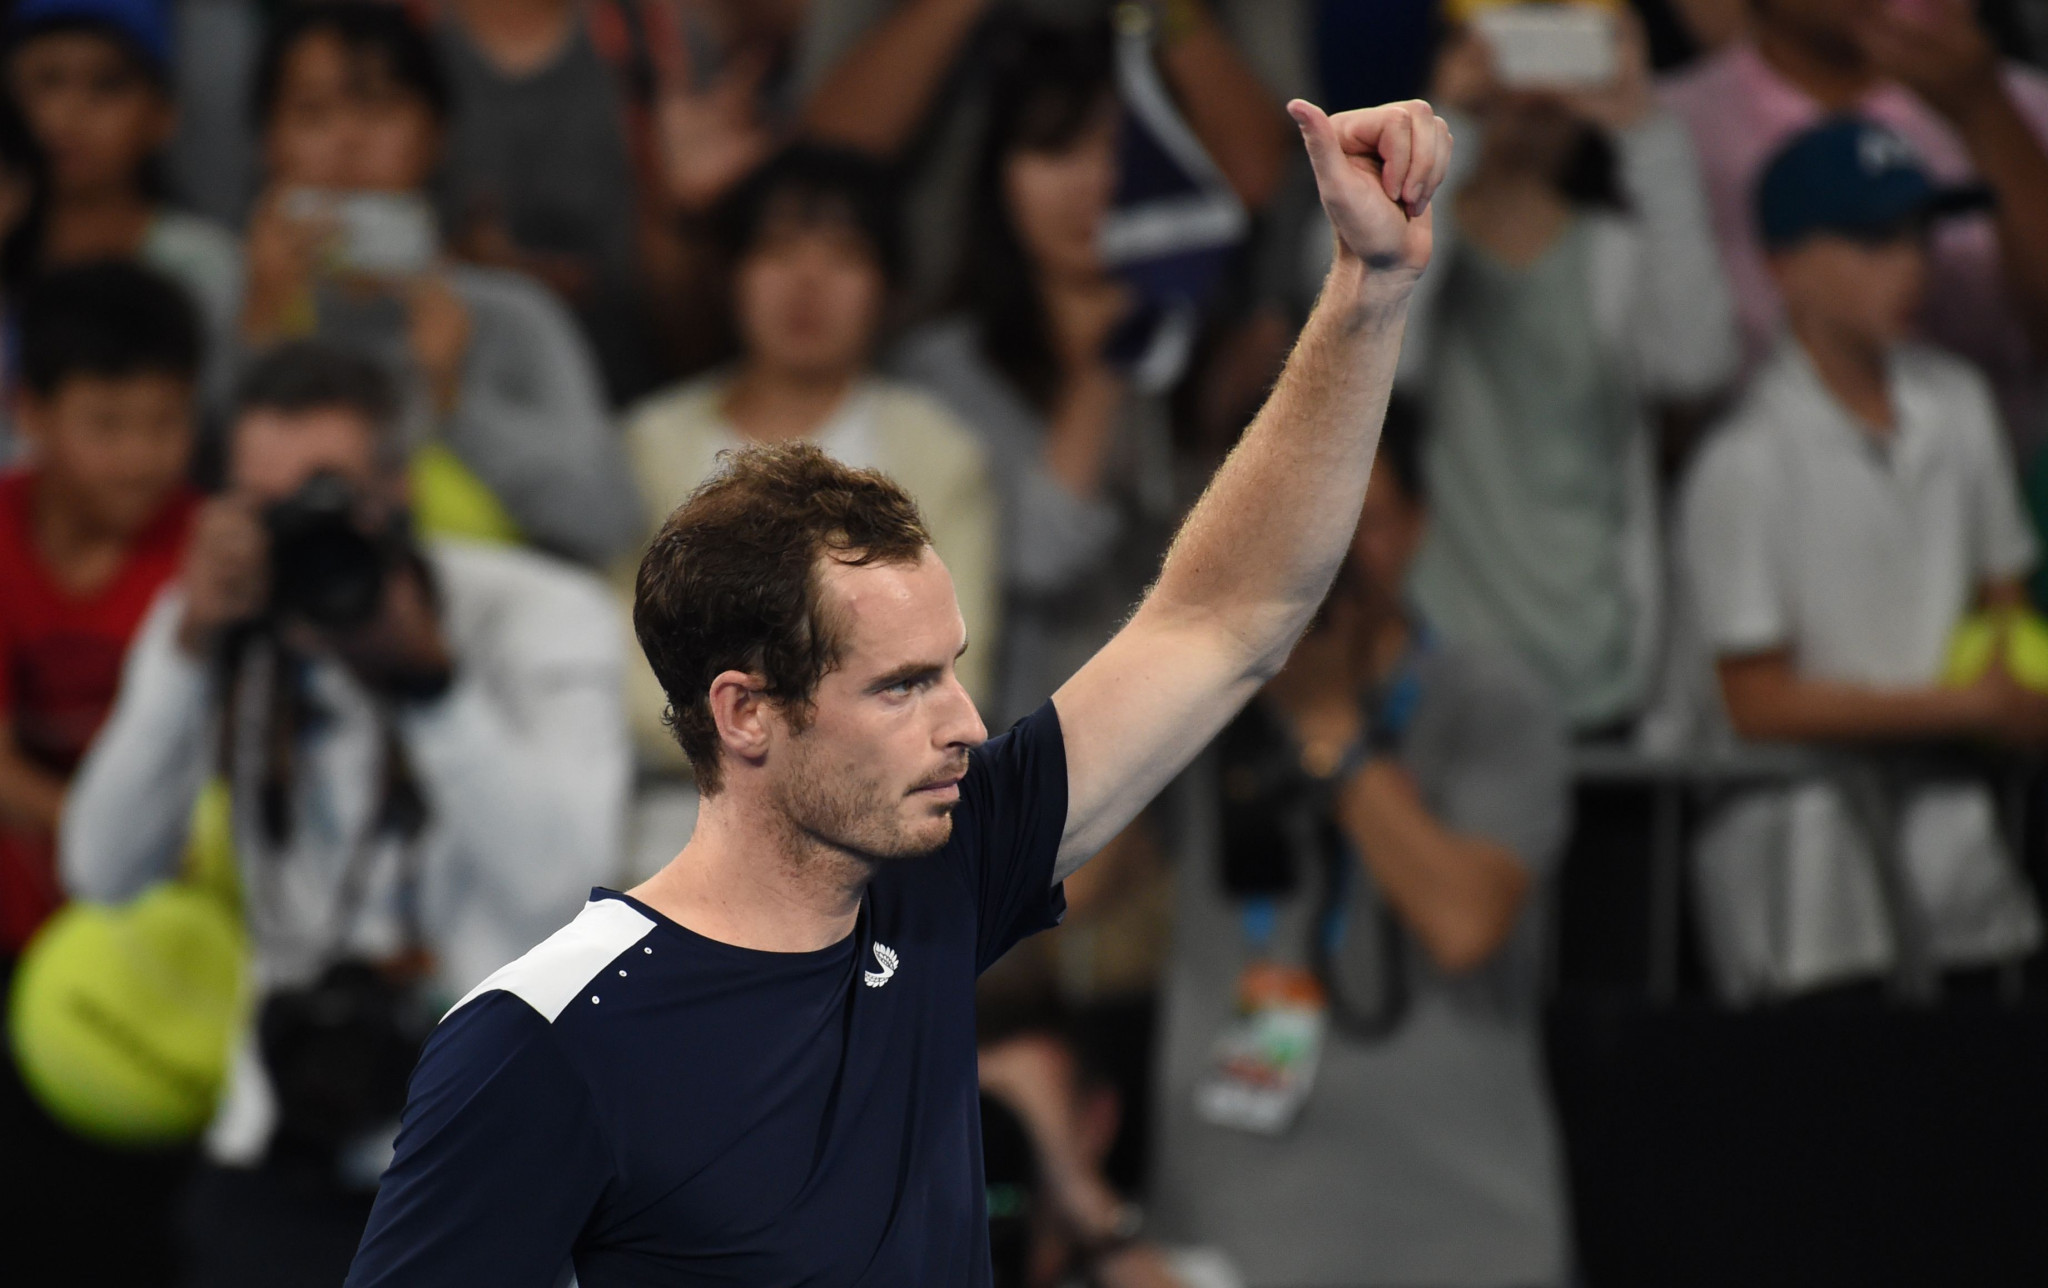 Great Britain's Sir Andy Murray has played what could be his final match, losing in five sets to Roberto Bautista Agut ©Getty Images